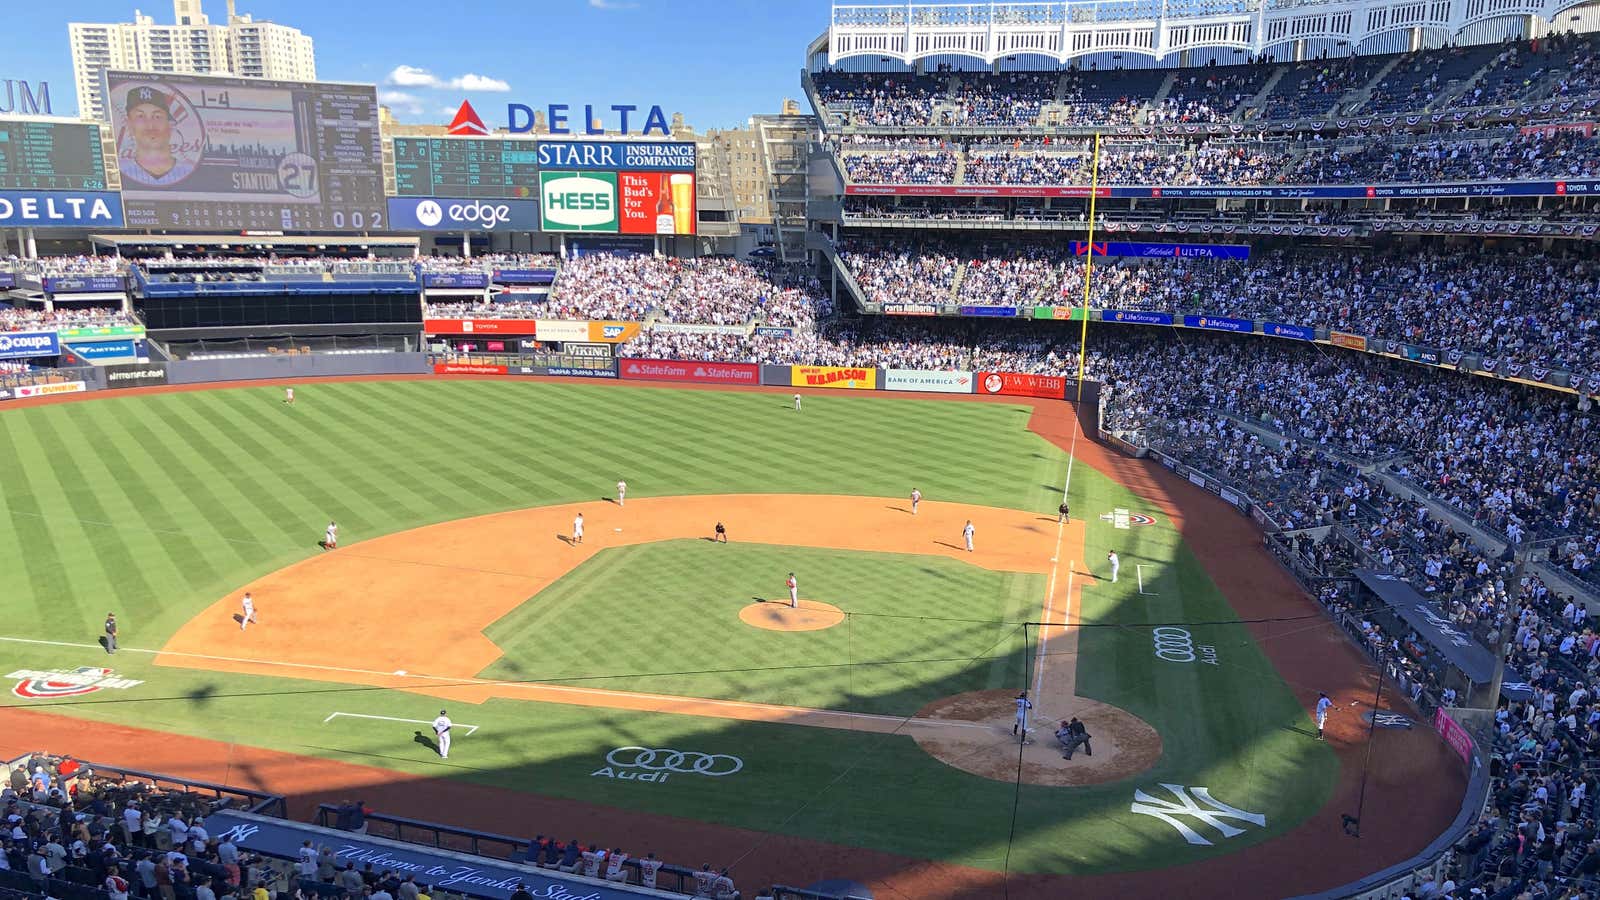 The Yankees play the Red Sox at Yankee Stadium on opening day.